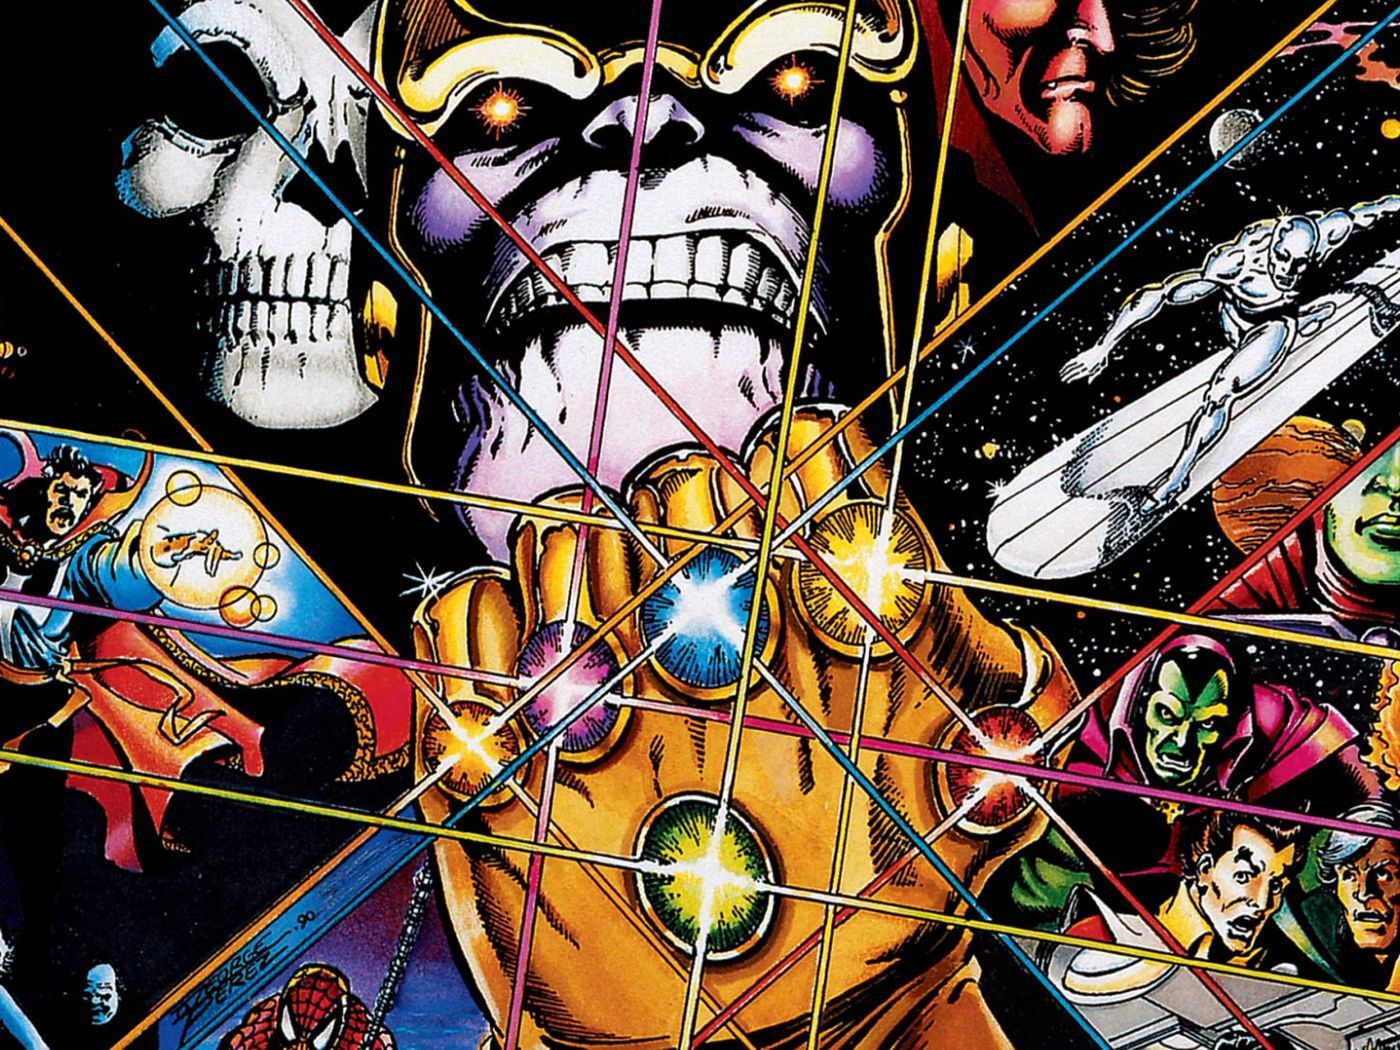 How does Avengers: Endgame and Infinity War end in the comics?